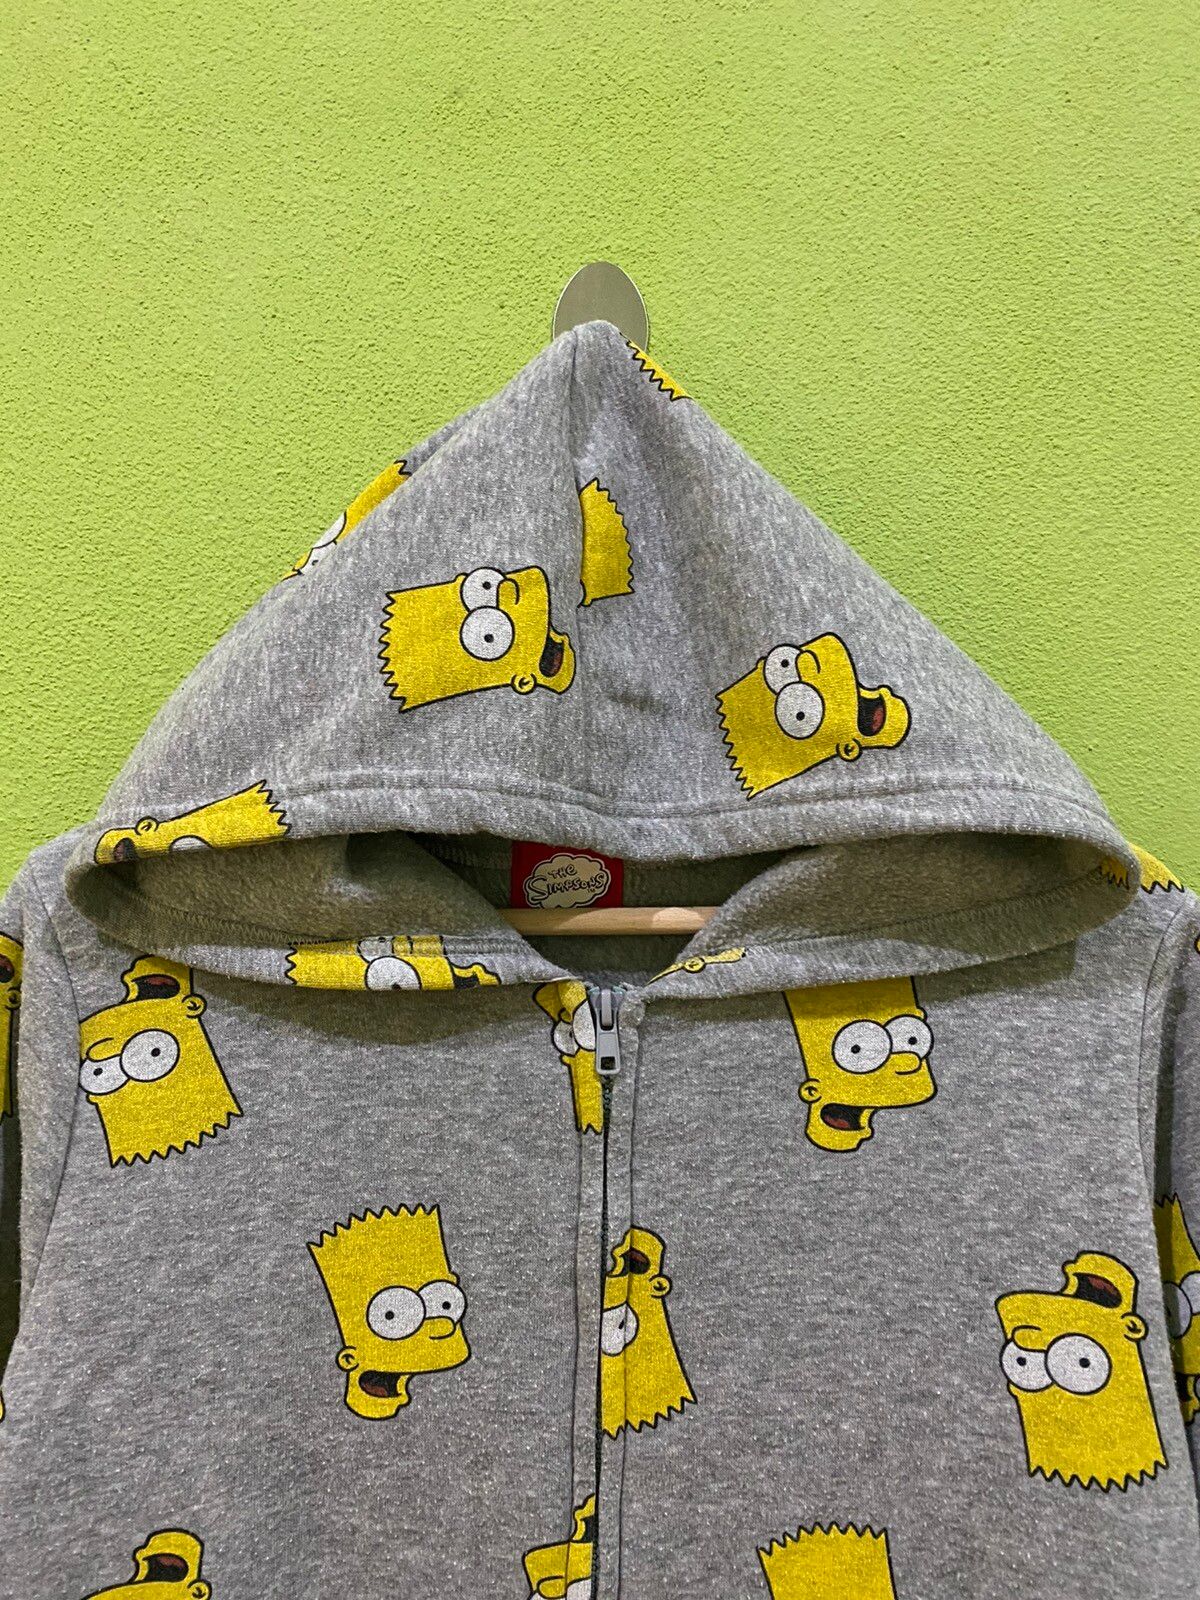 The Simpsons The Simpsons Full Print Hoddies Sweater Size US M / EU 48-50 / 2 - 2 Preview